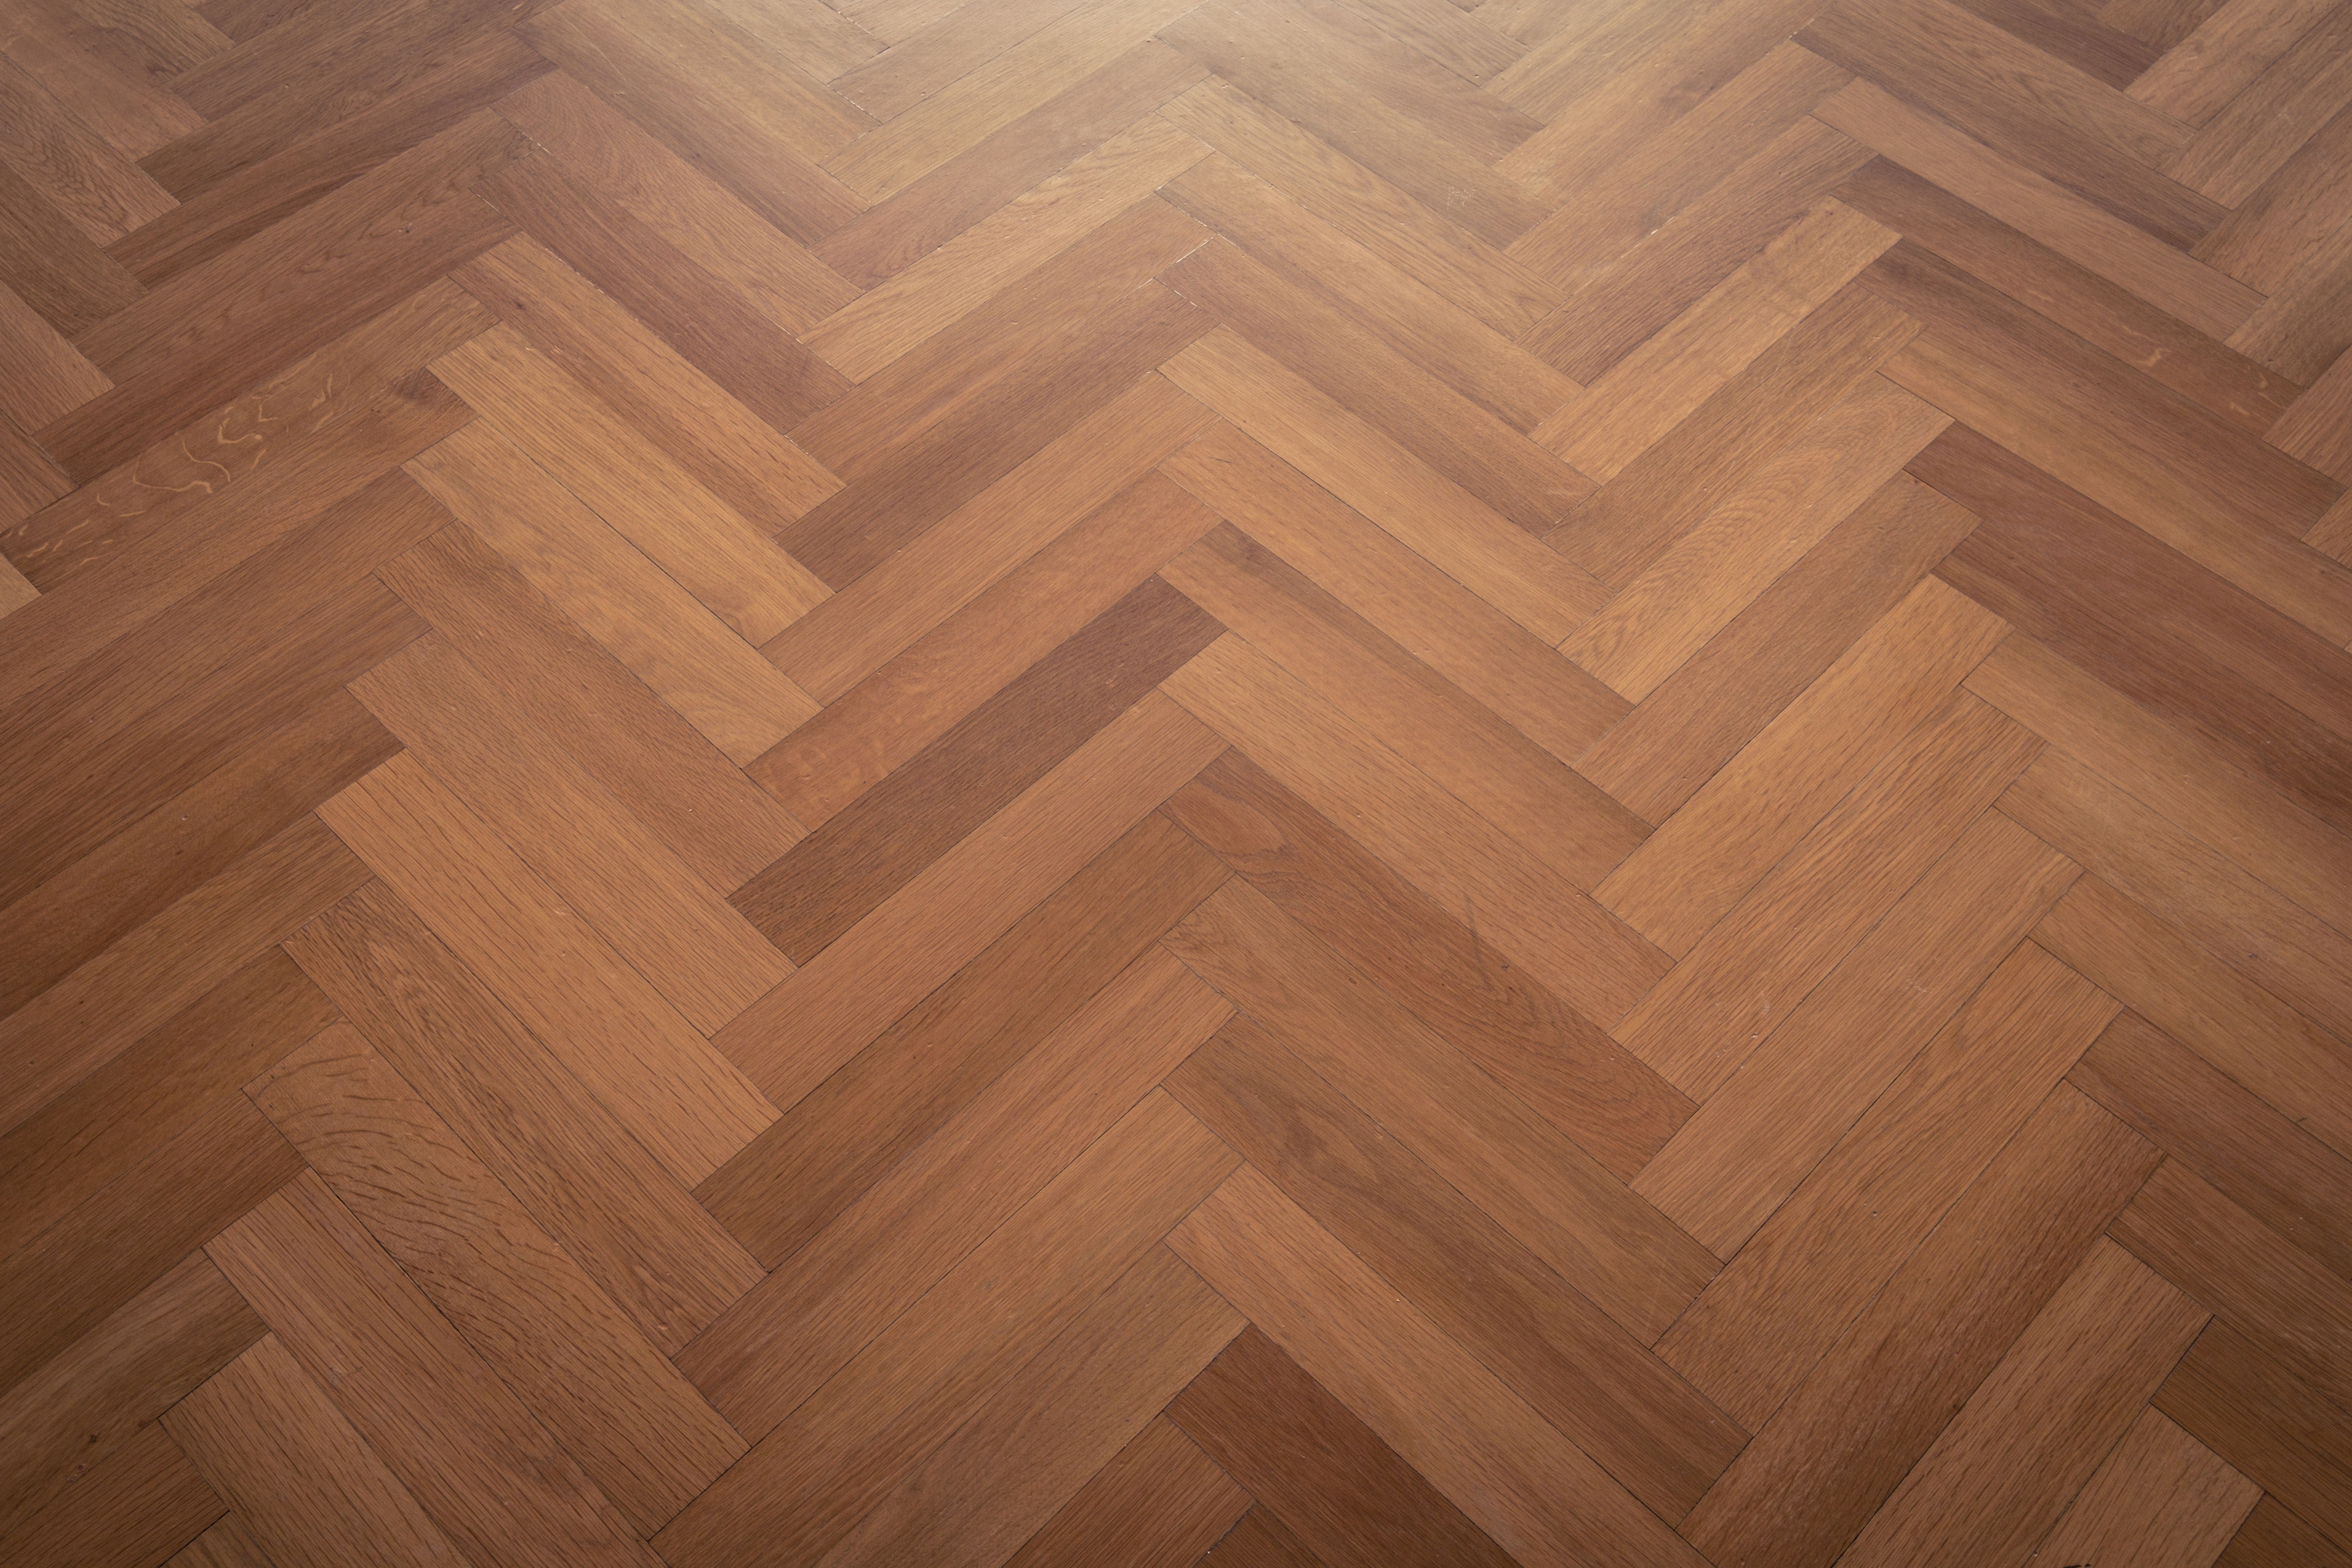 Ready For A Flooring Upgrade? Essential Prep For Commercial Karndean Flooring